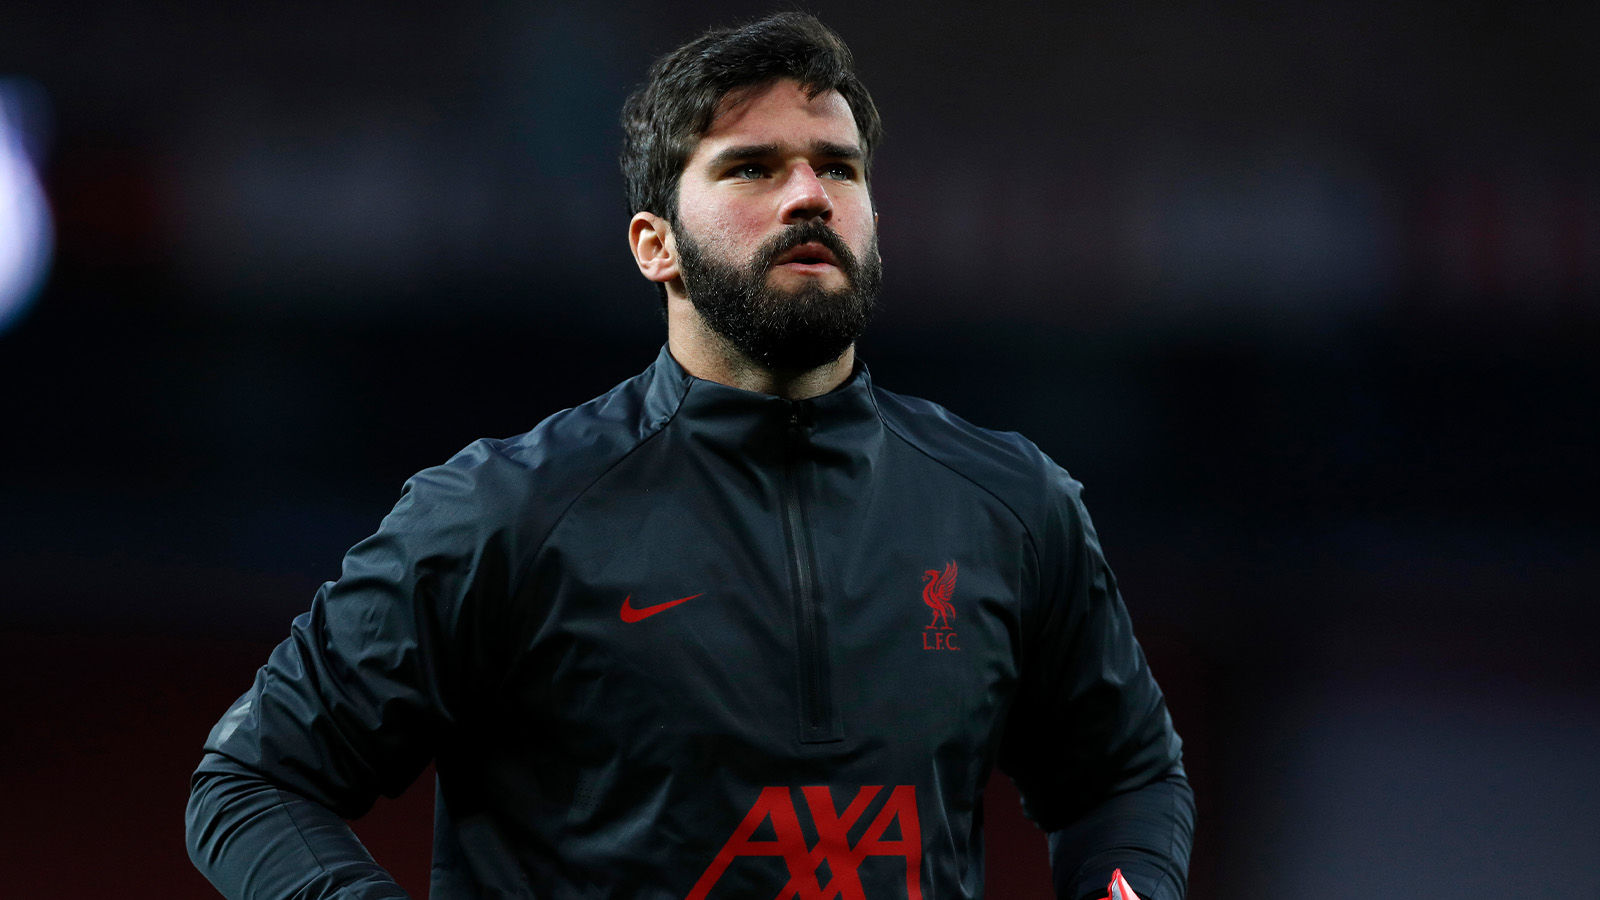 Liverpool goalkeeper Alisson’s father drowns in Brazil, club ‘deeply saddened’